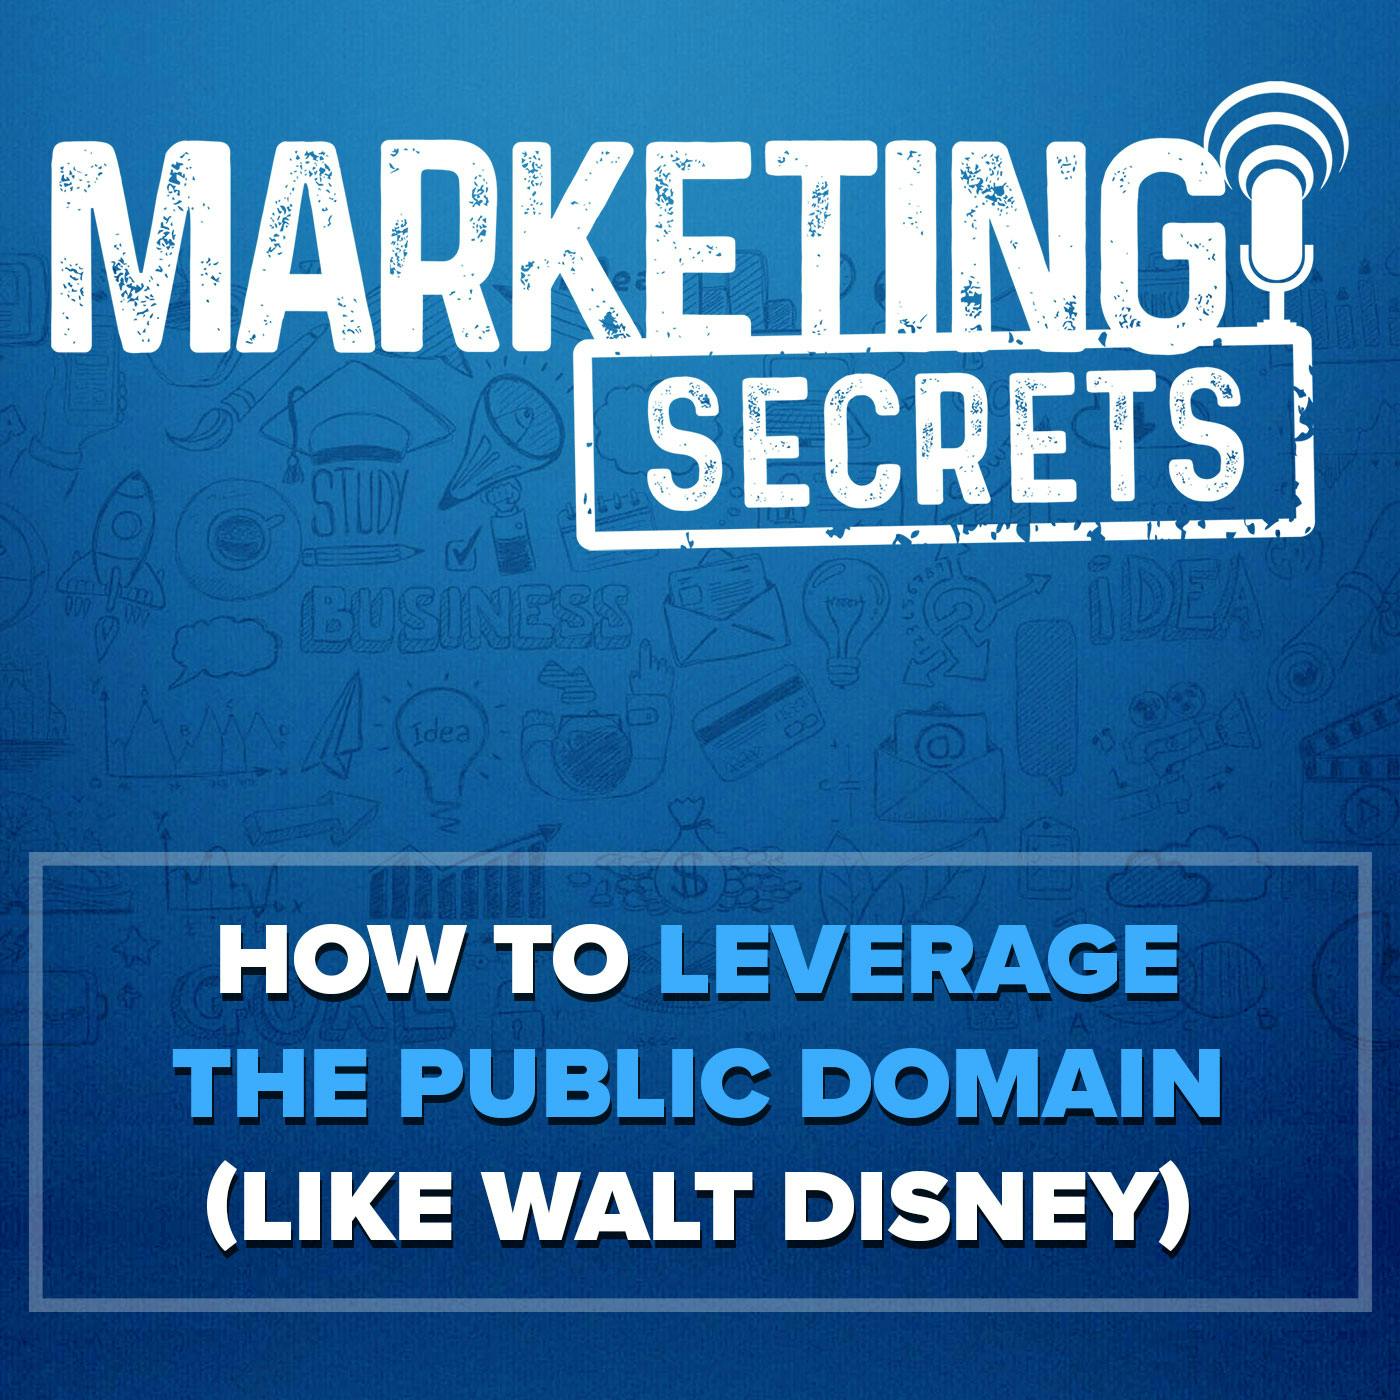 How To Leverage the Public Domain (Like Walt Disney) by Russell Brunson